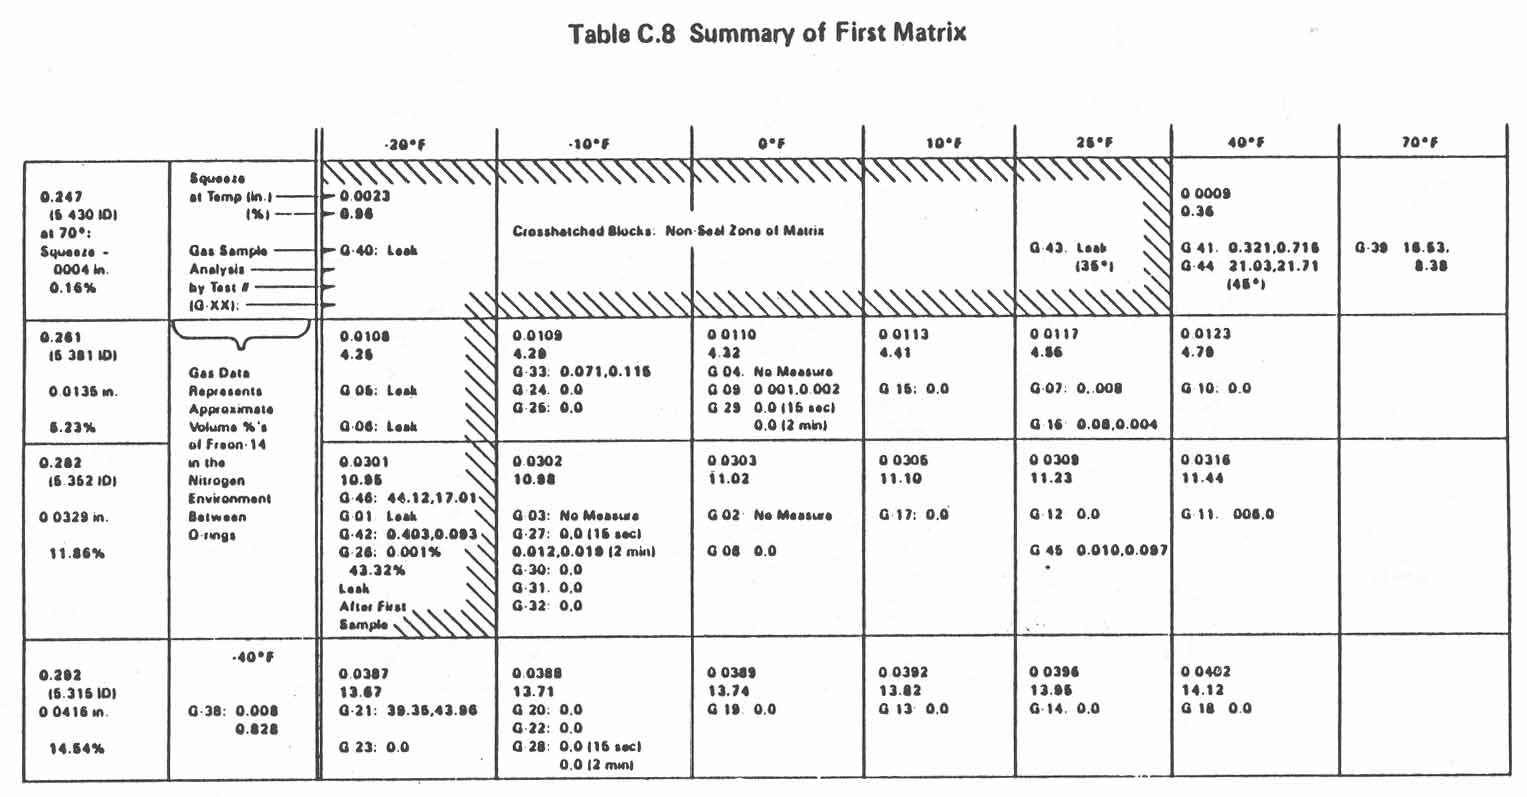 Table C.8. Summary of First Matrix.